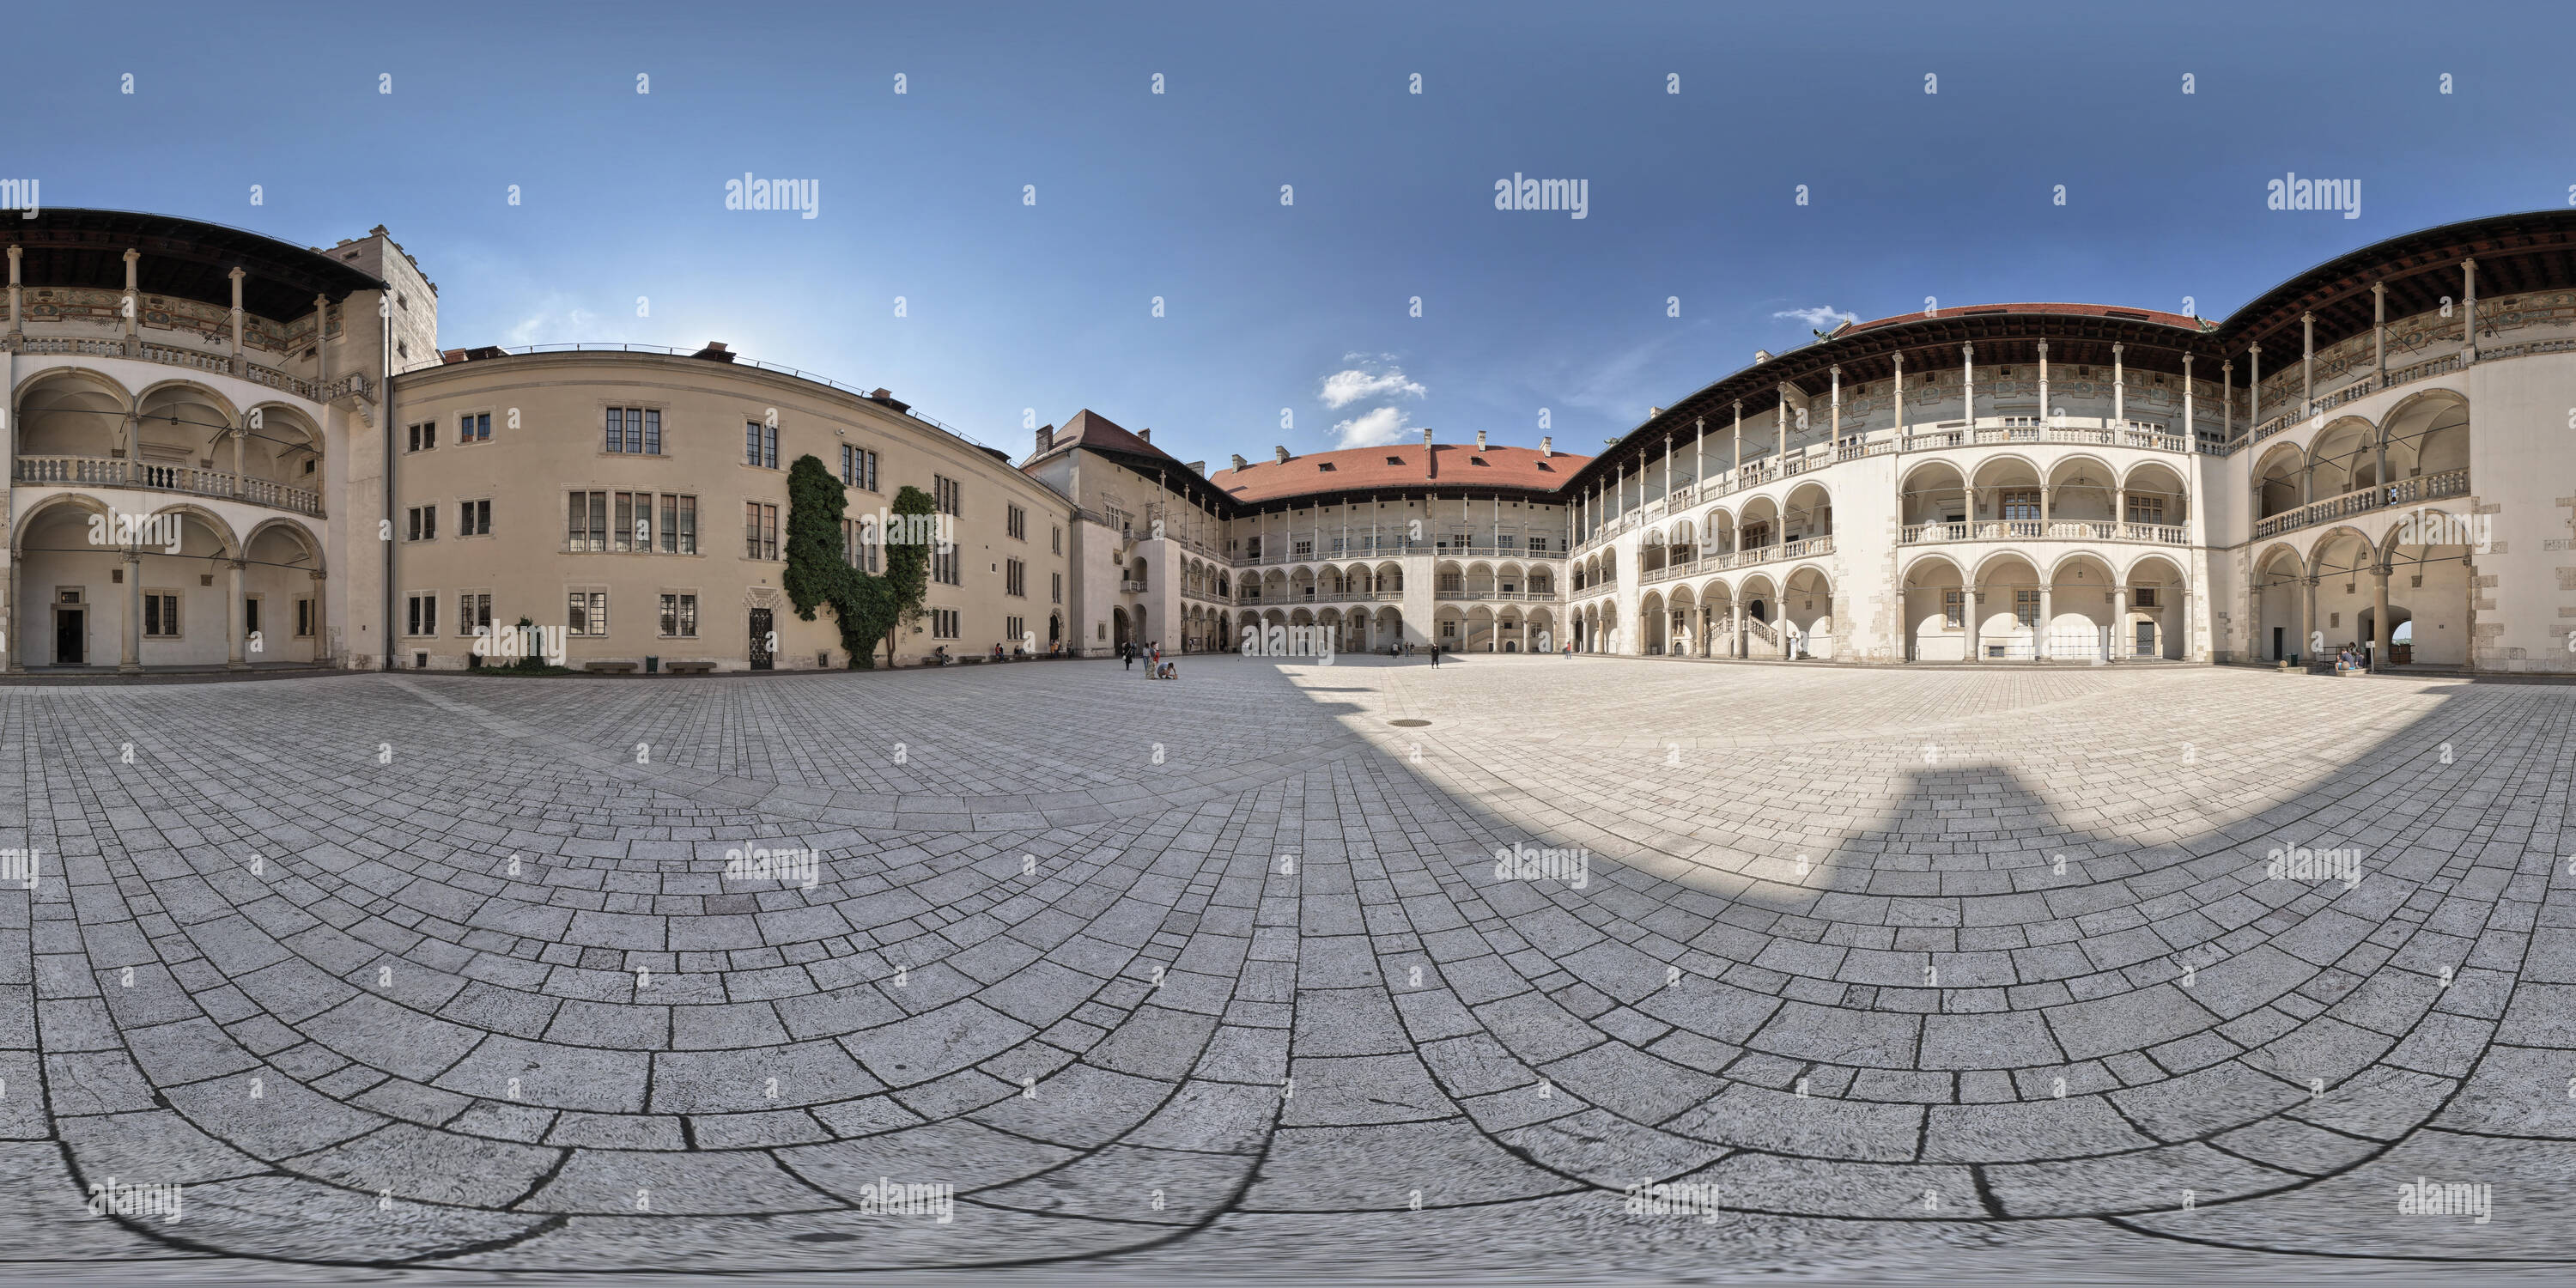 360 degree panoramic view of A 360 degree virtual tour of the Wawel Hill in Krakow with the royal castle and the cathedral.